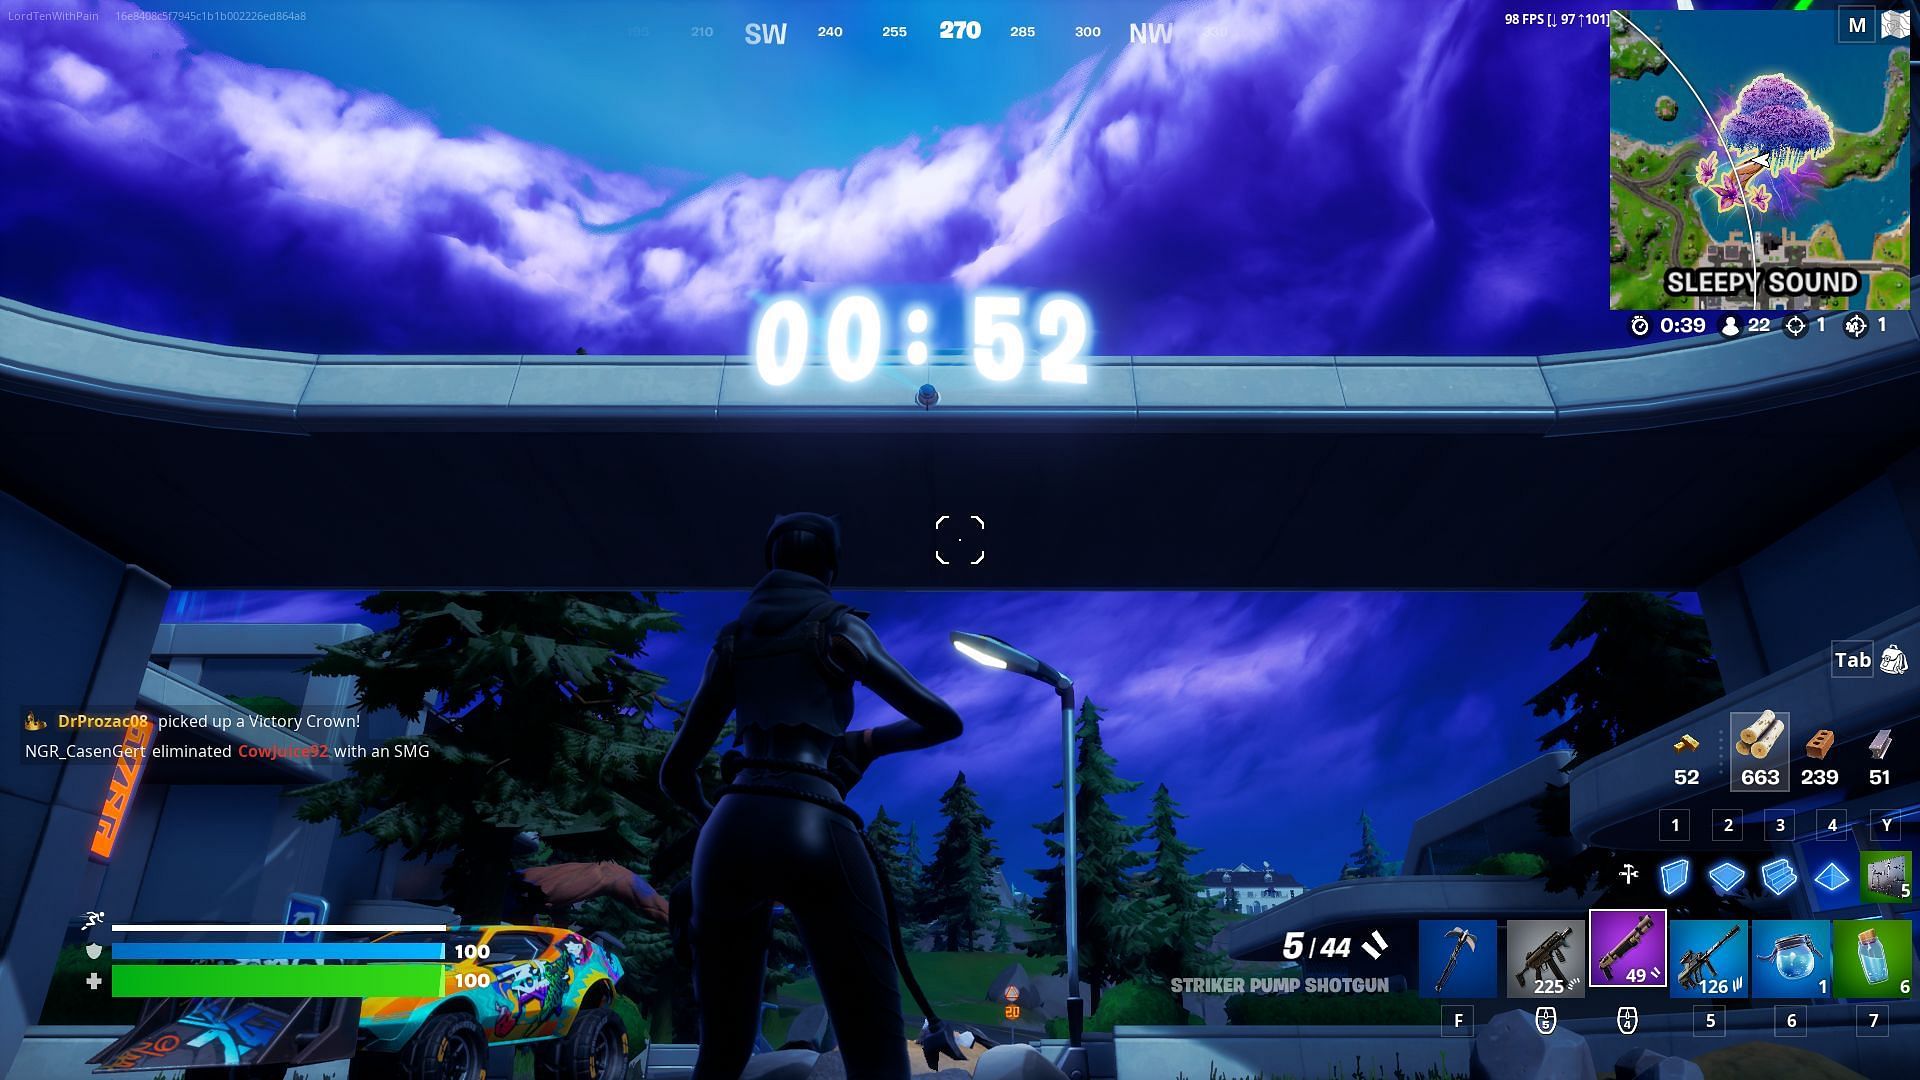 Tick tock goes Fortnite&#039;s Neo reality holographic clock (Image via Reddit//Xx_Rick_Rolled_xX)